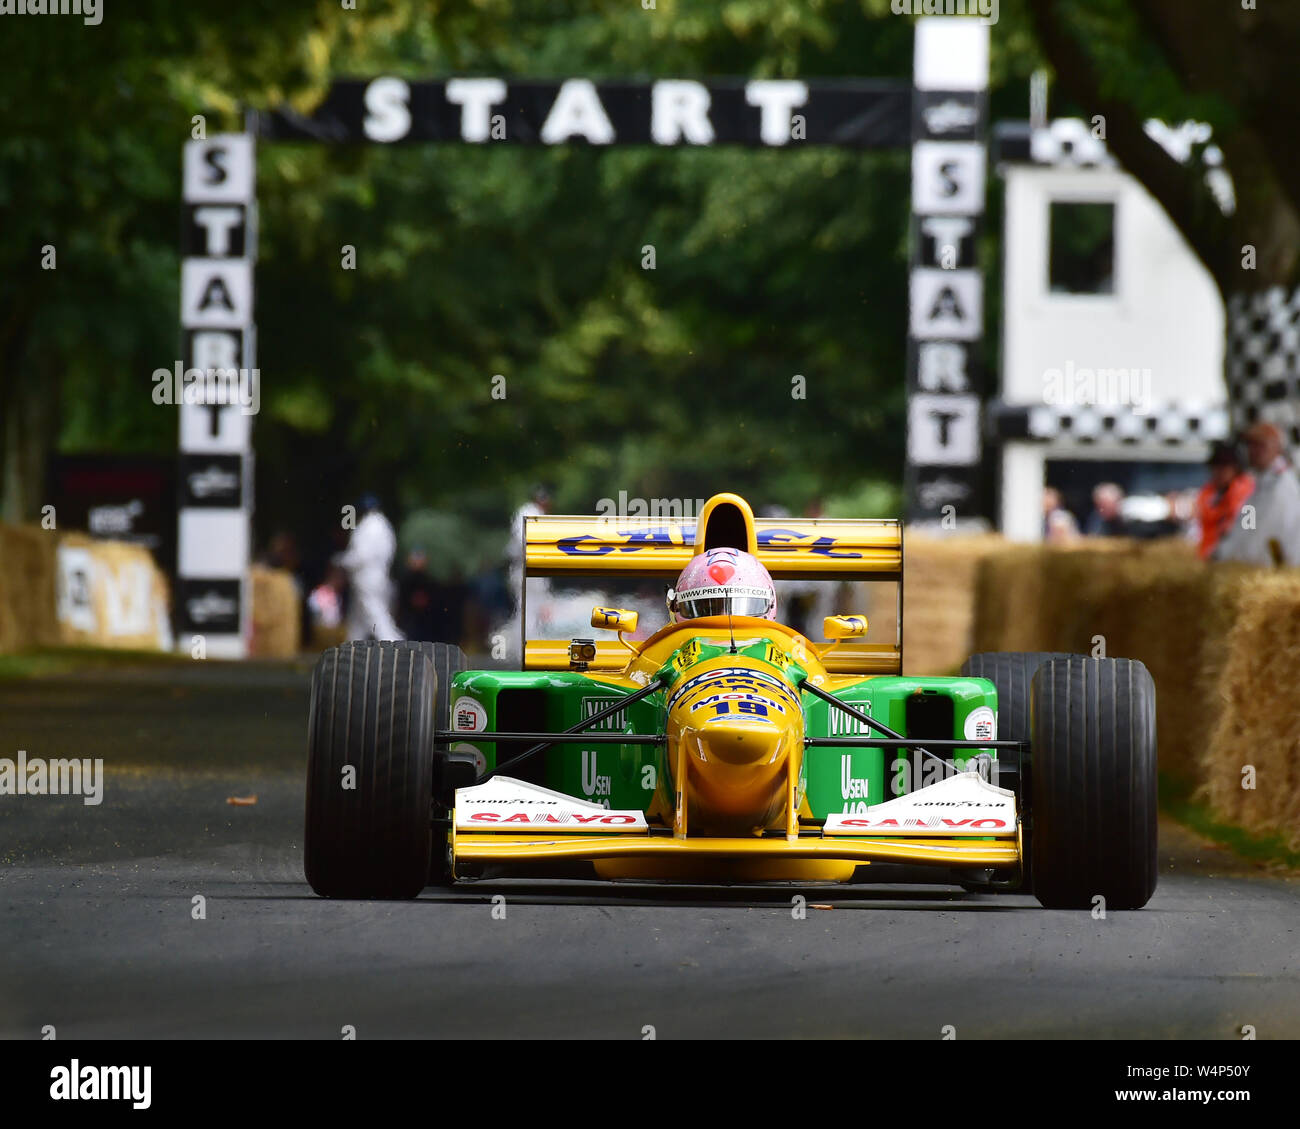 Lorina McLaughlin, Benetton-Ford B192, Shootout Final, Goodwood Festival of Speed, 2019, Festival of Speed, Speed Kings, Motorsport's Record Breakers, Stock Photo